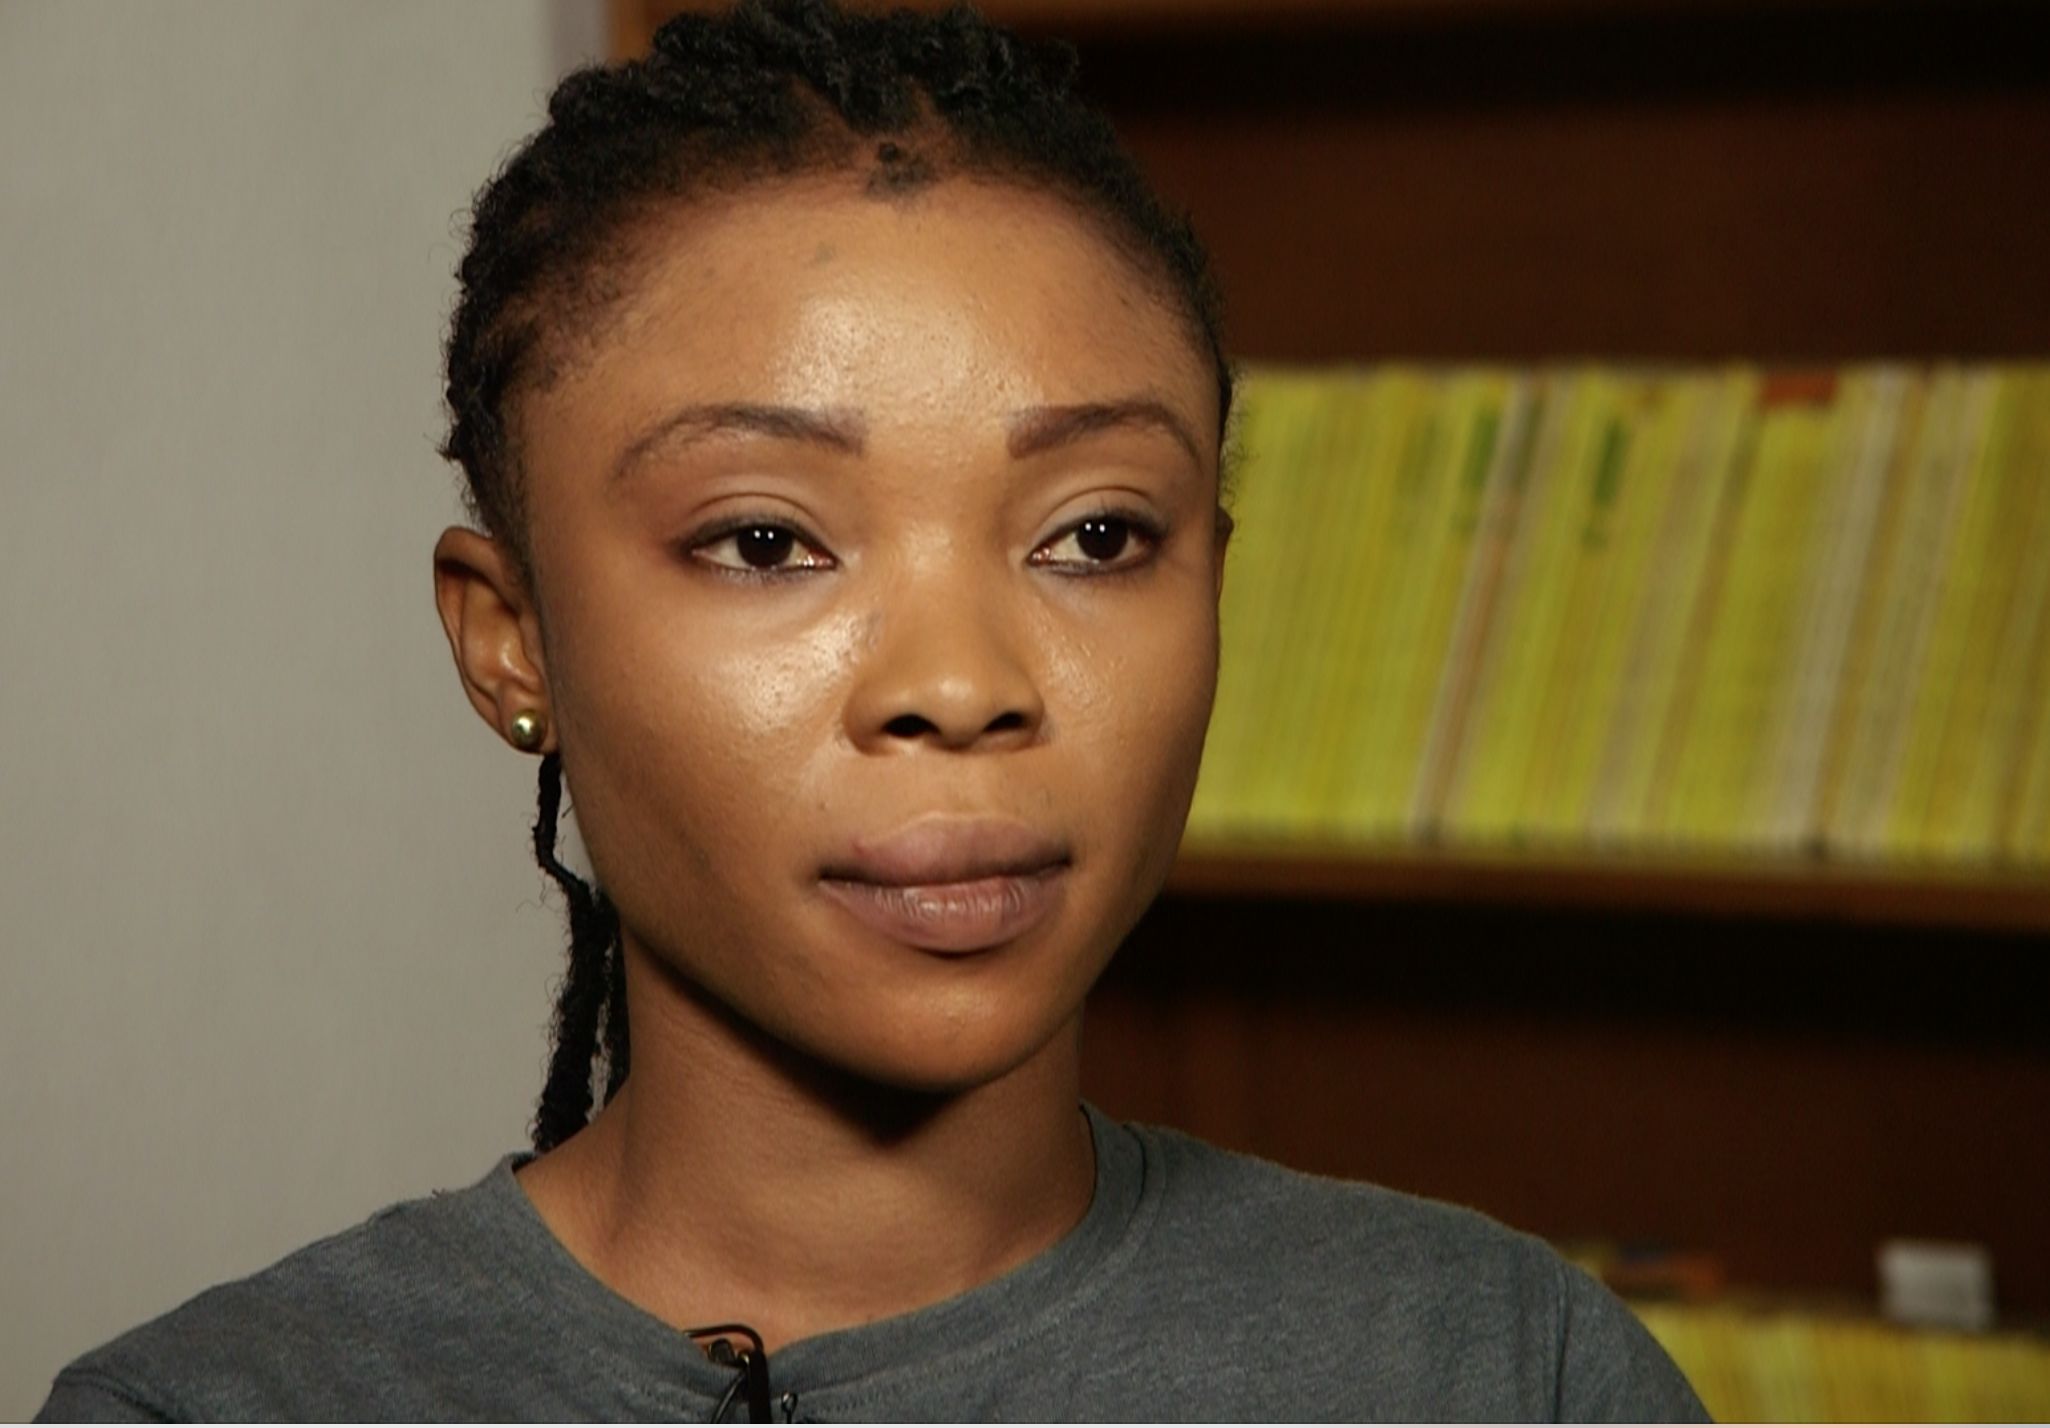 Study Hostel Force Sex Videos - Monica Osagie: Nigerian student who taped lecturer asking for sex speaks  out | CNN